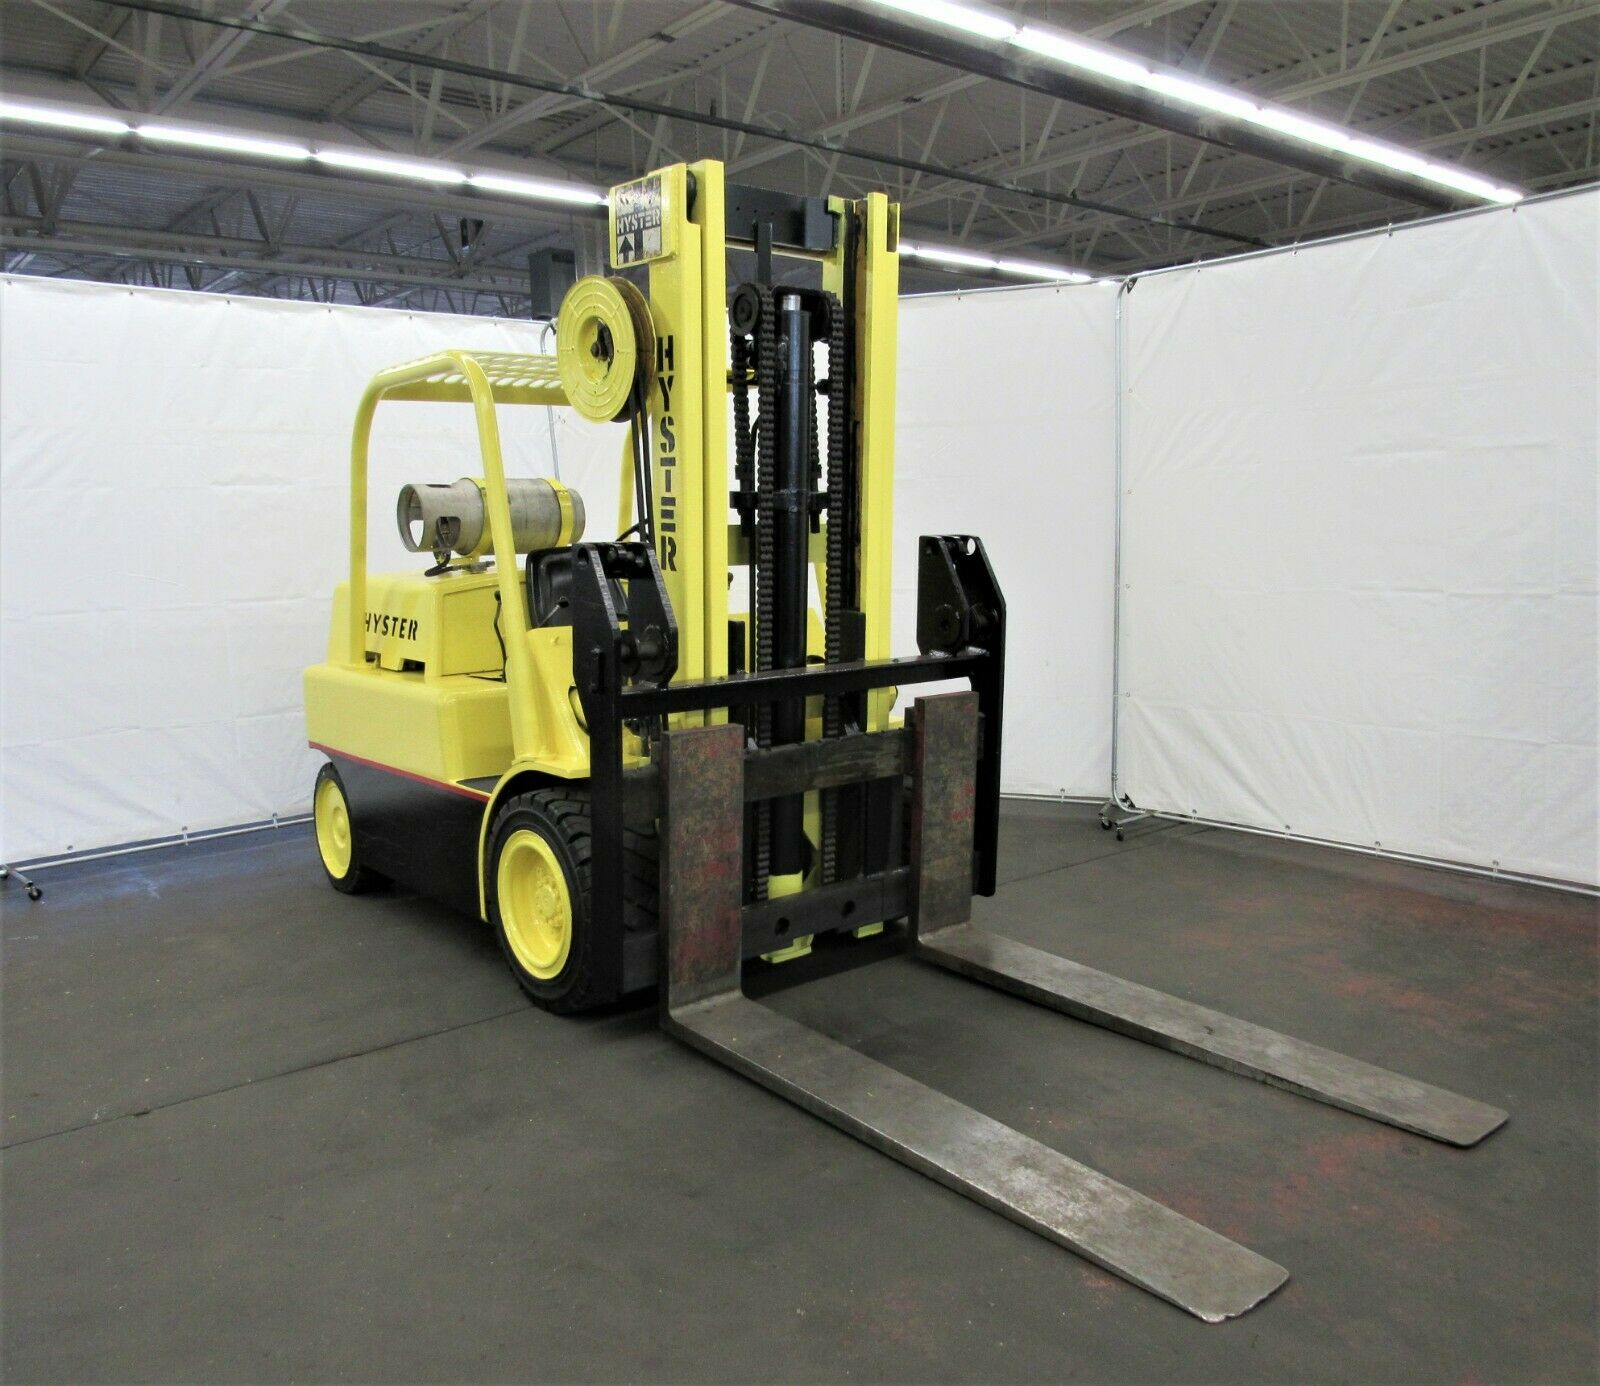 Hyster S150a, 15,000 Lb. Capacity, Propane Forklift, #n-026